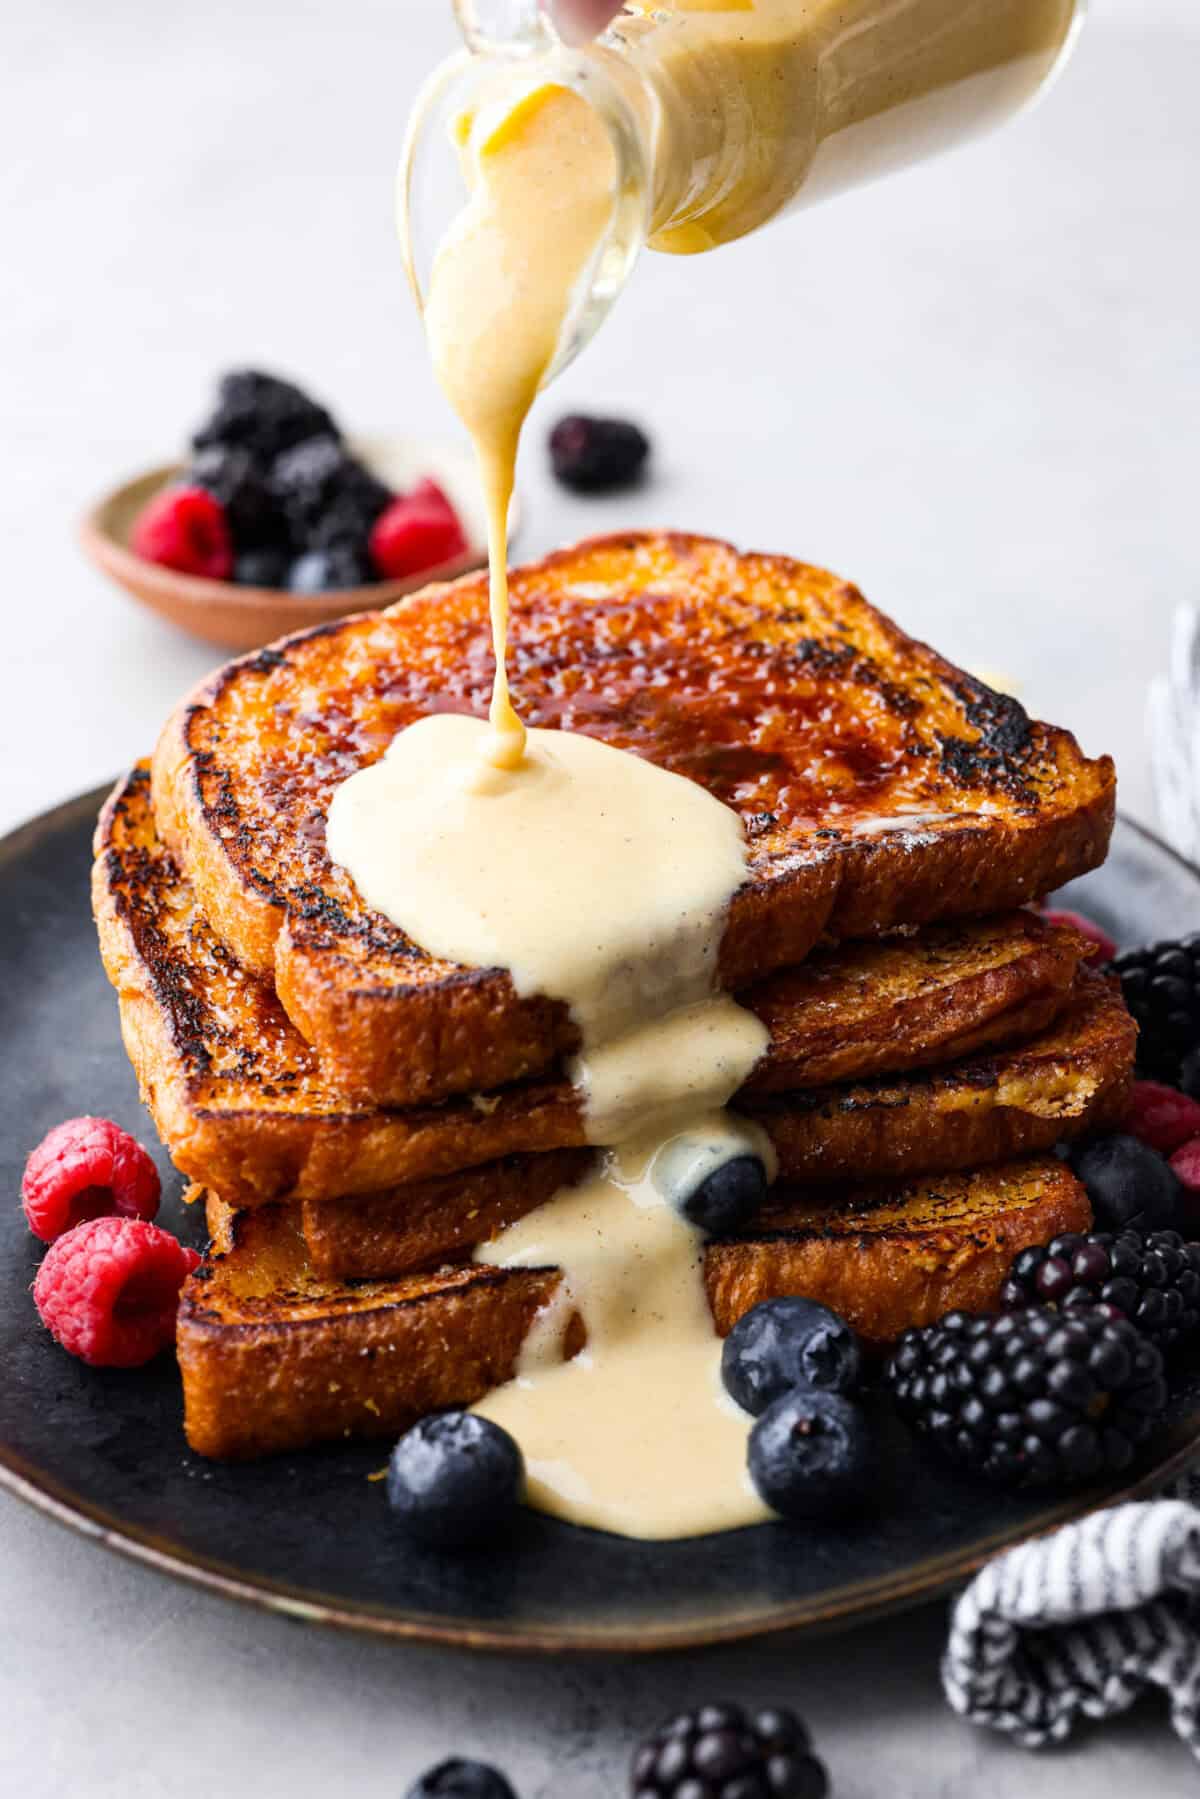 Close view of the creme anglaise sauce pouring on a pile of creme brûlée French toast.